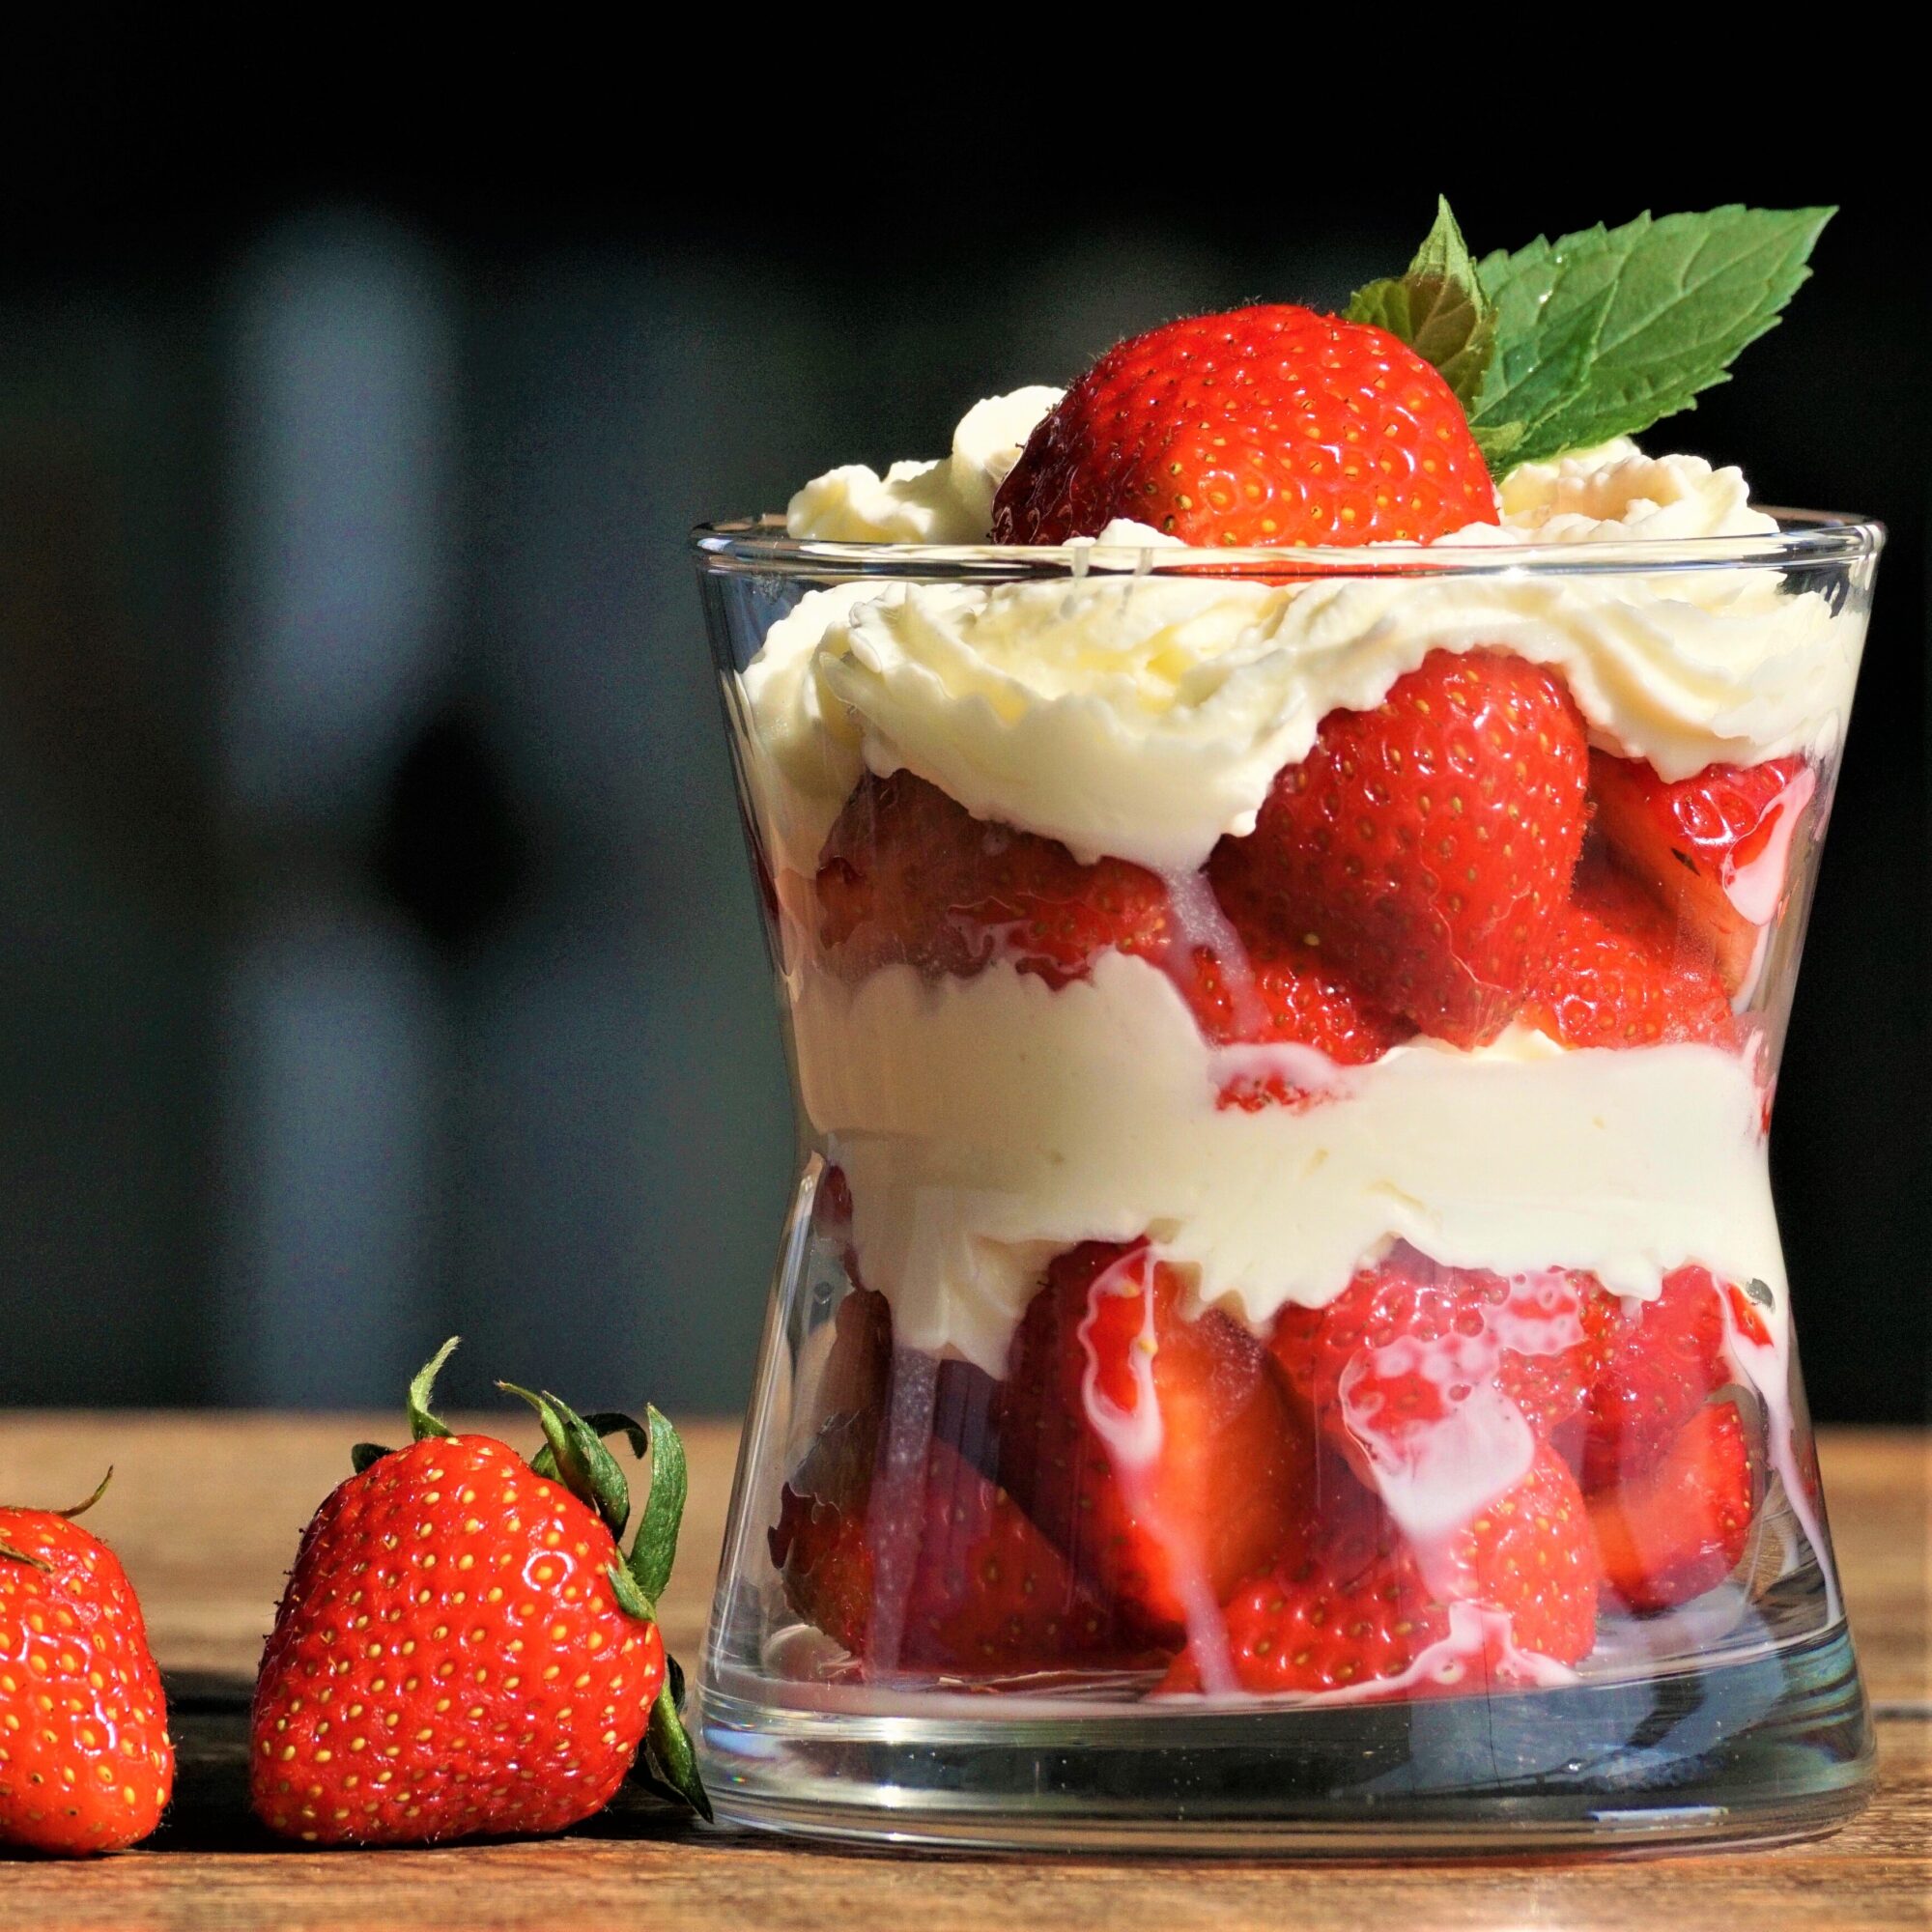 strawberries and cream layered in a class with two strawberreis by the side